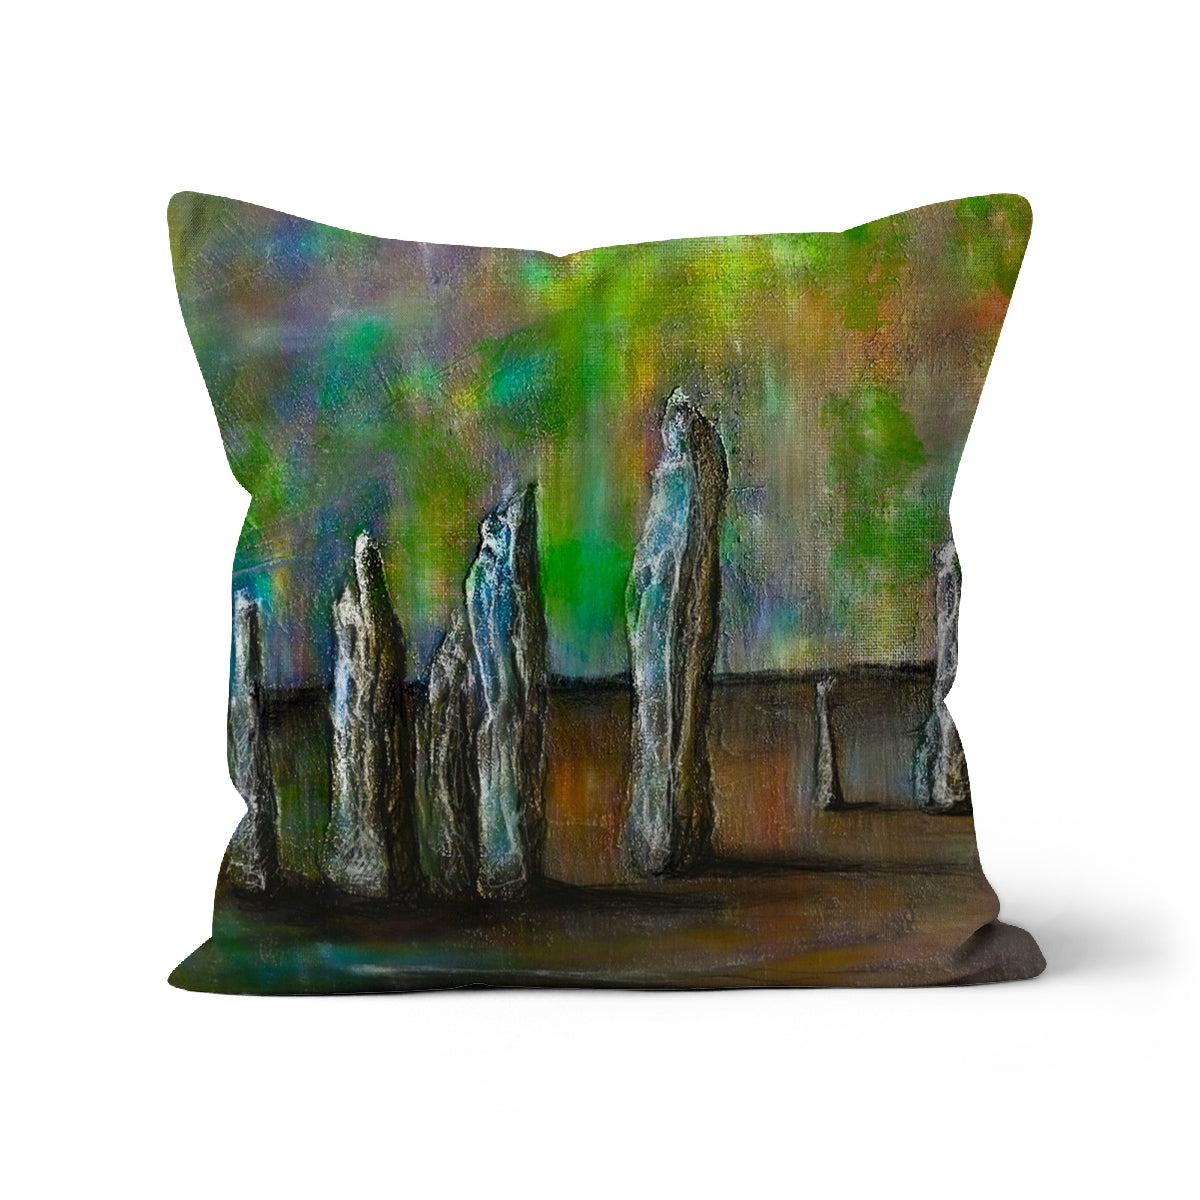 Callanish Northern Lights Art Gifts Cushion-Cushions-Hebridean Islands Art Gallery-Canvas-24"x24"-Paintings, Prints, Homeware, Art Gifts From Scotland By Scottish Artist Kevin Hunter